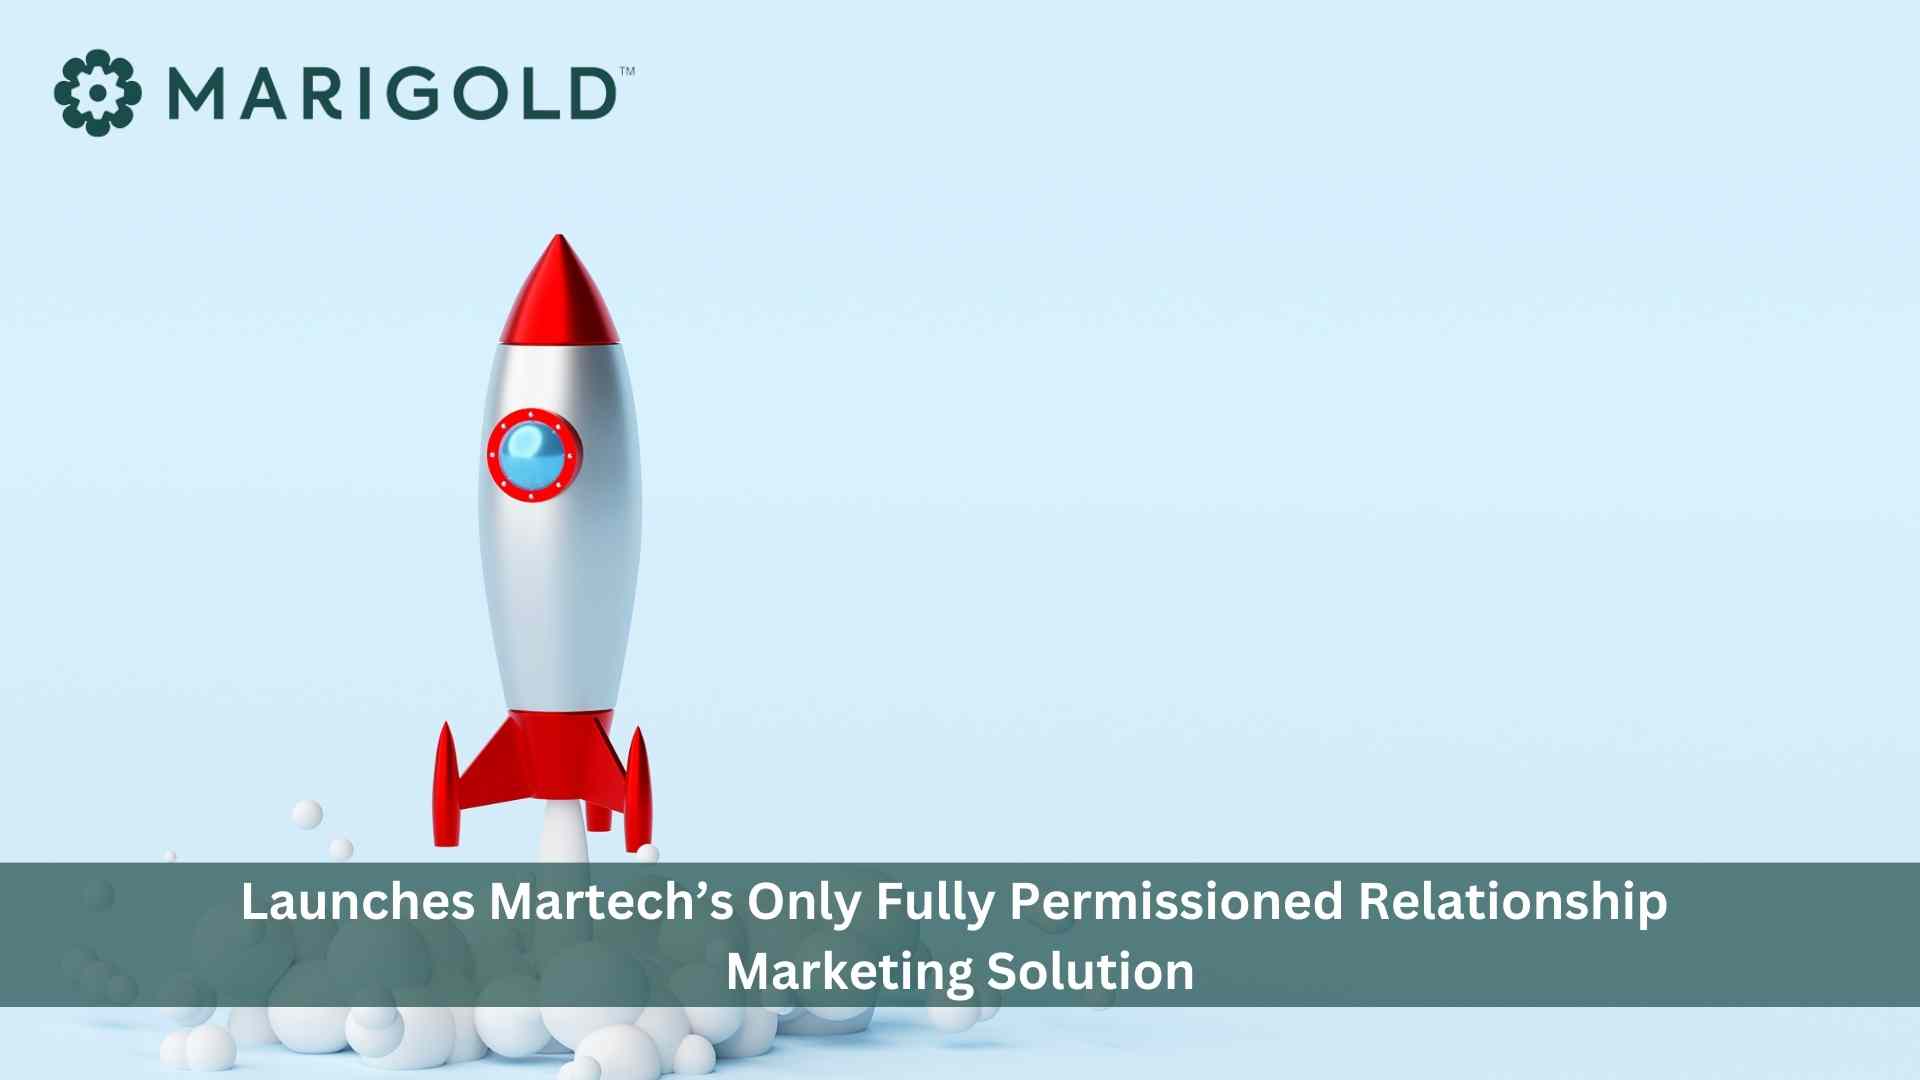 Marigold™ Launches Martech’s Only Fully Permissioned Relationship Marketing Solution that Enables Hyper-Personalization at Scale